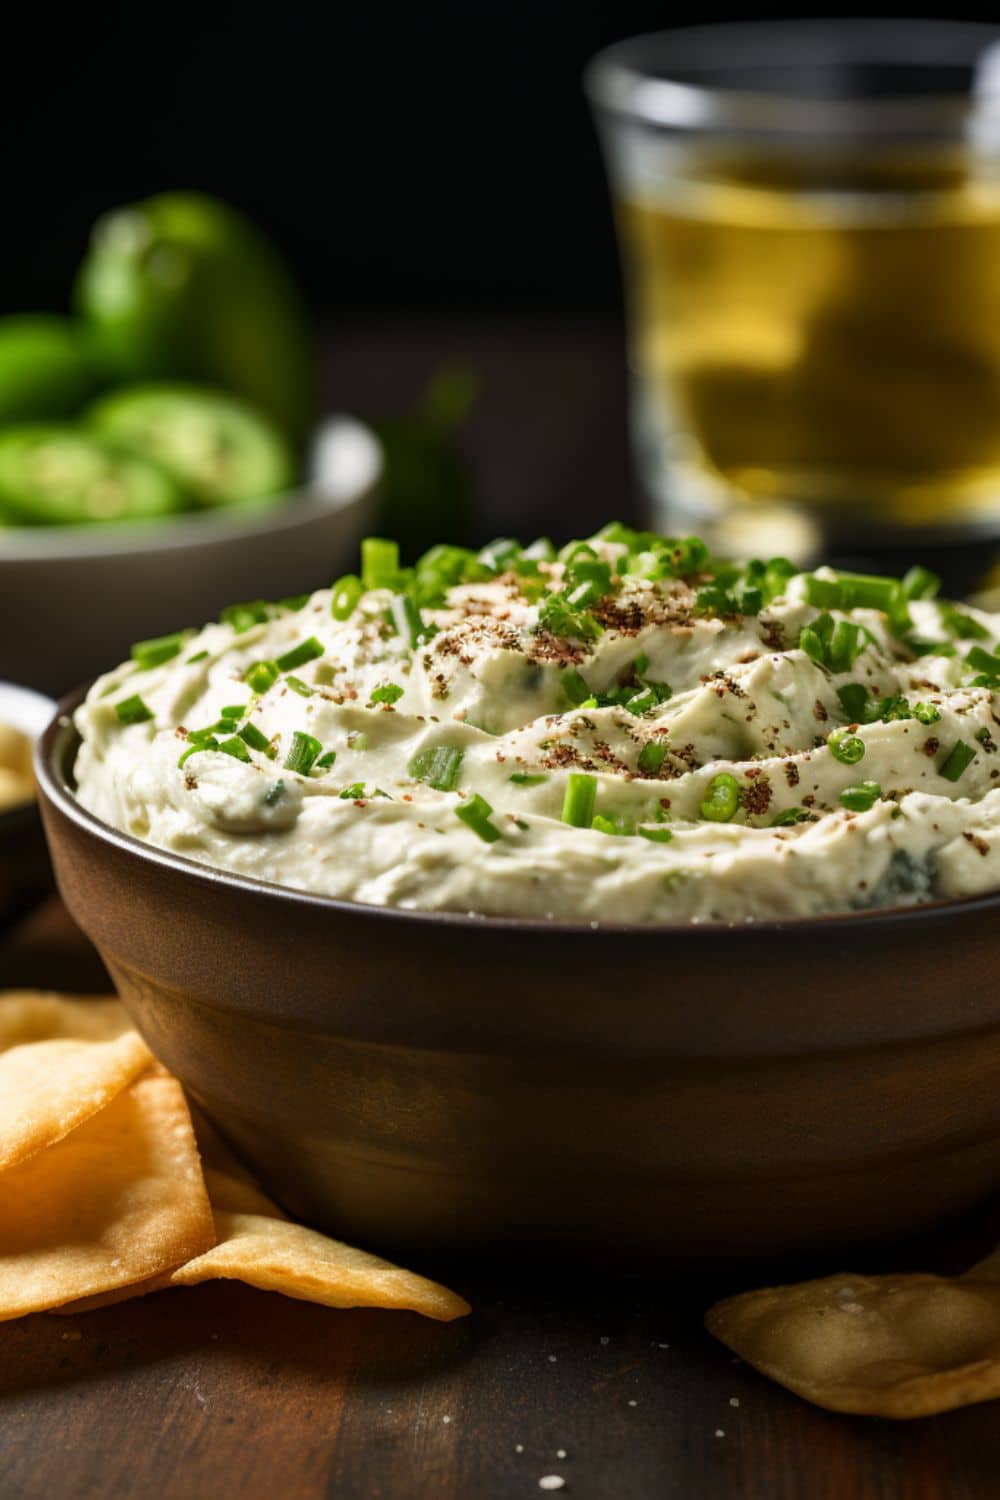 Dirty martini Dip topped with chives and green chopped olives